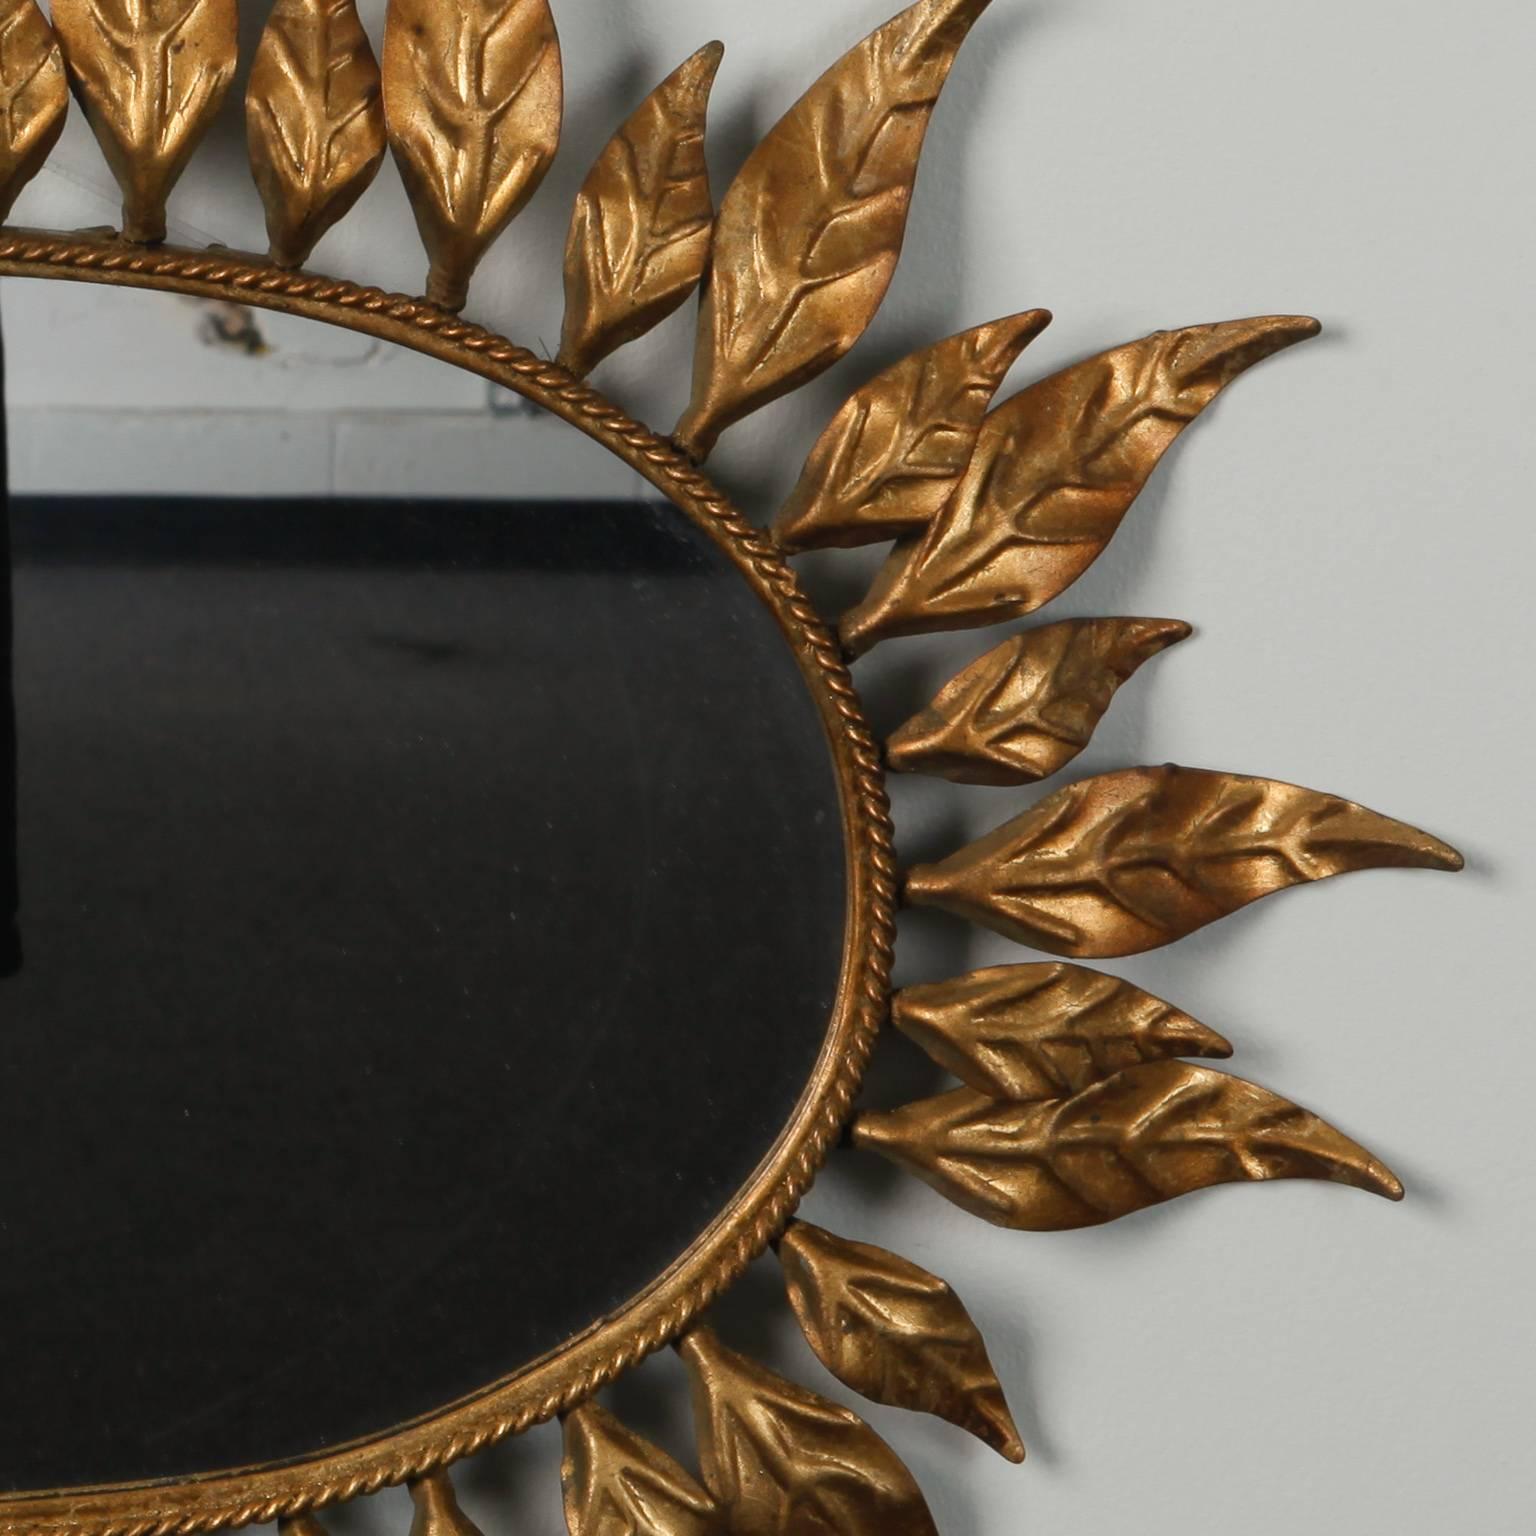 Oval mirror with pressed gold tone metal leaf form rays forming a sunburst frame, circa 1960s. Twisted, rope form inner border. 
